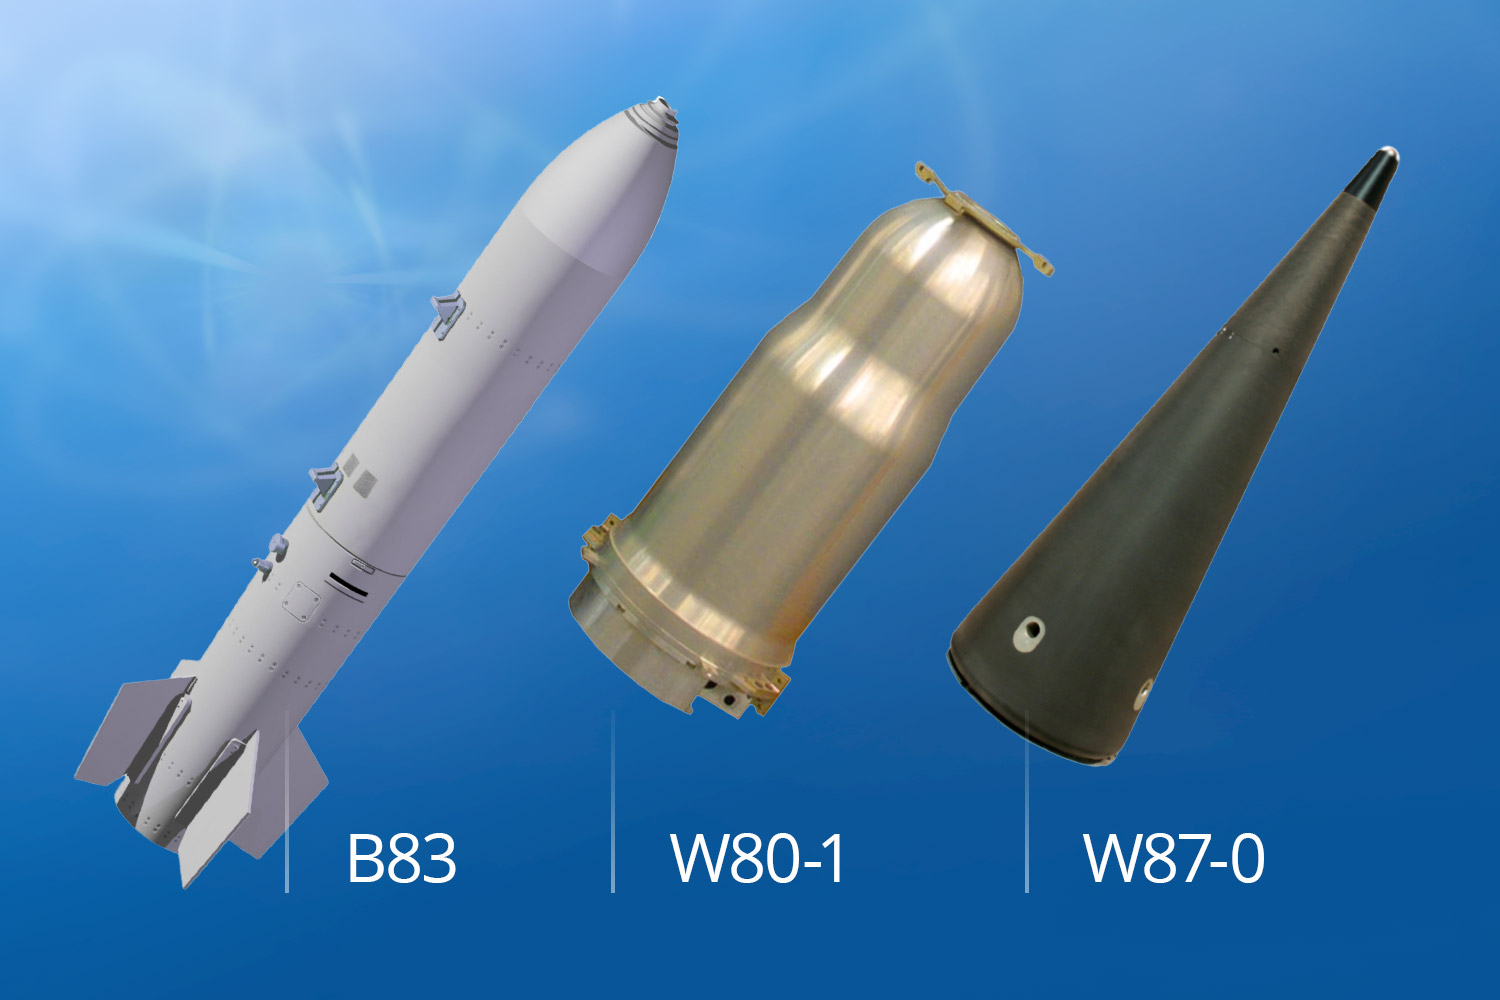 Images of the B83, W80-1, and W87-0 with a blue sky background